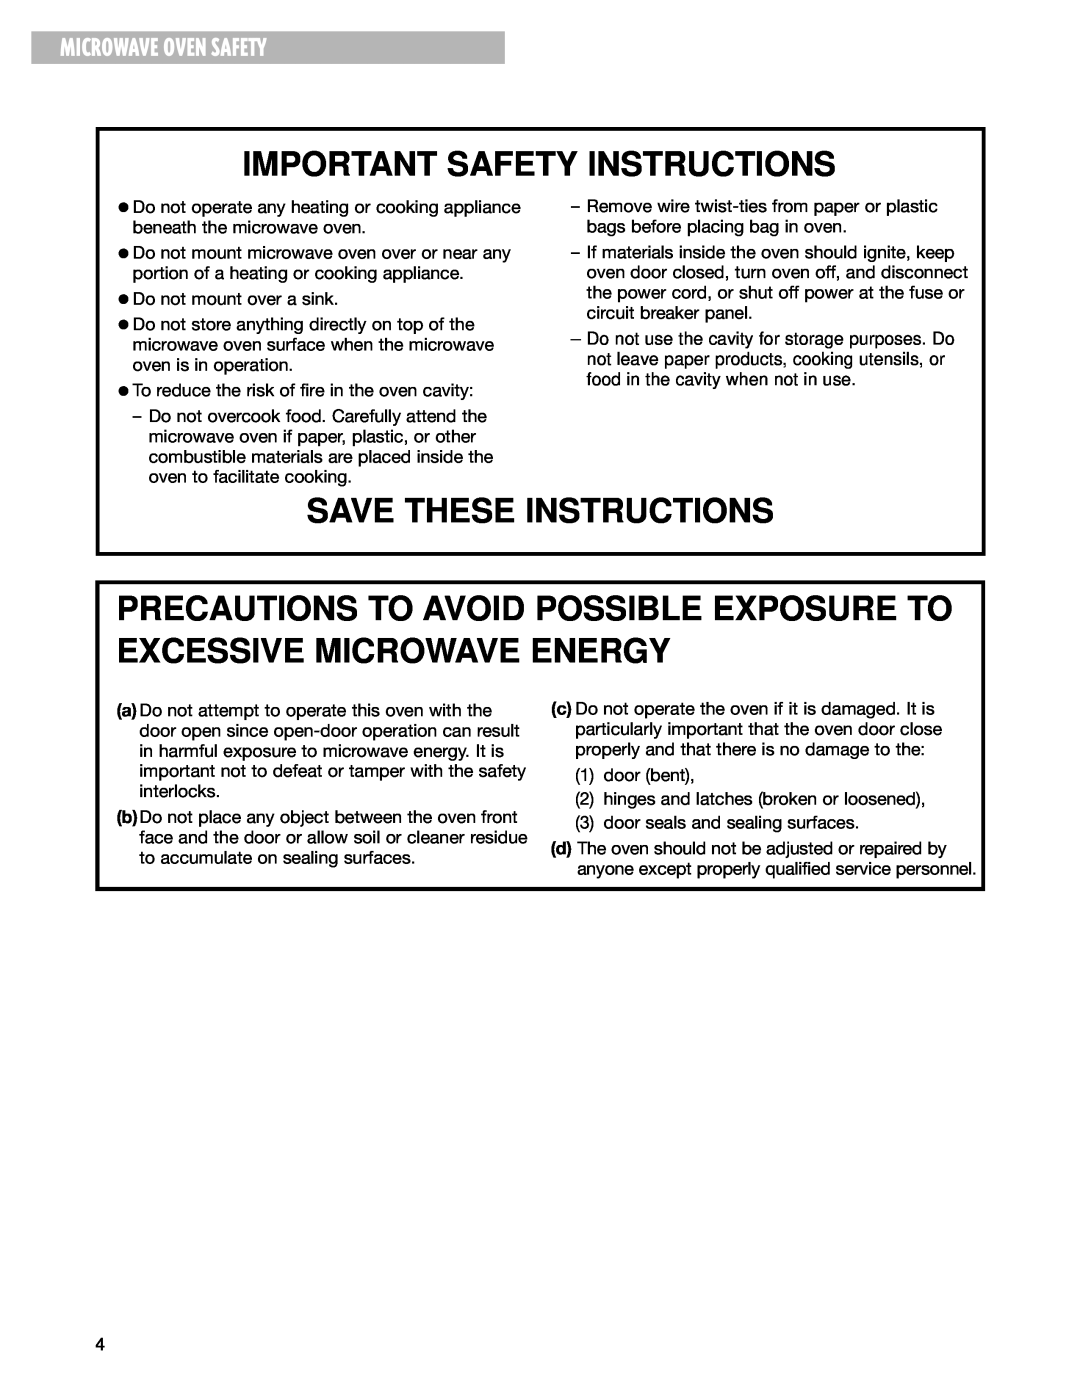 Whirlpool MT1111SK Precautions To Avoid Possible Exposure To Excessive Microwave Energy, Microwave Oven Safety 